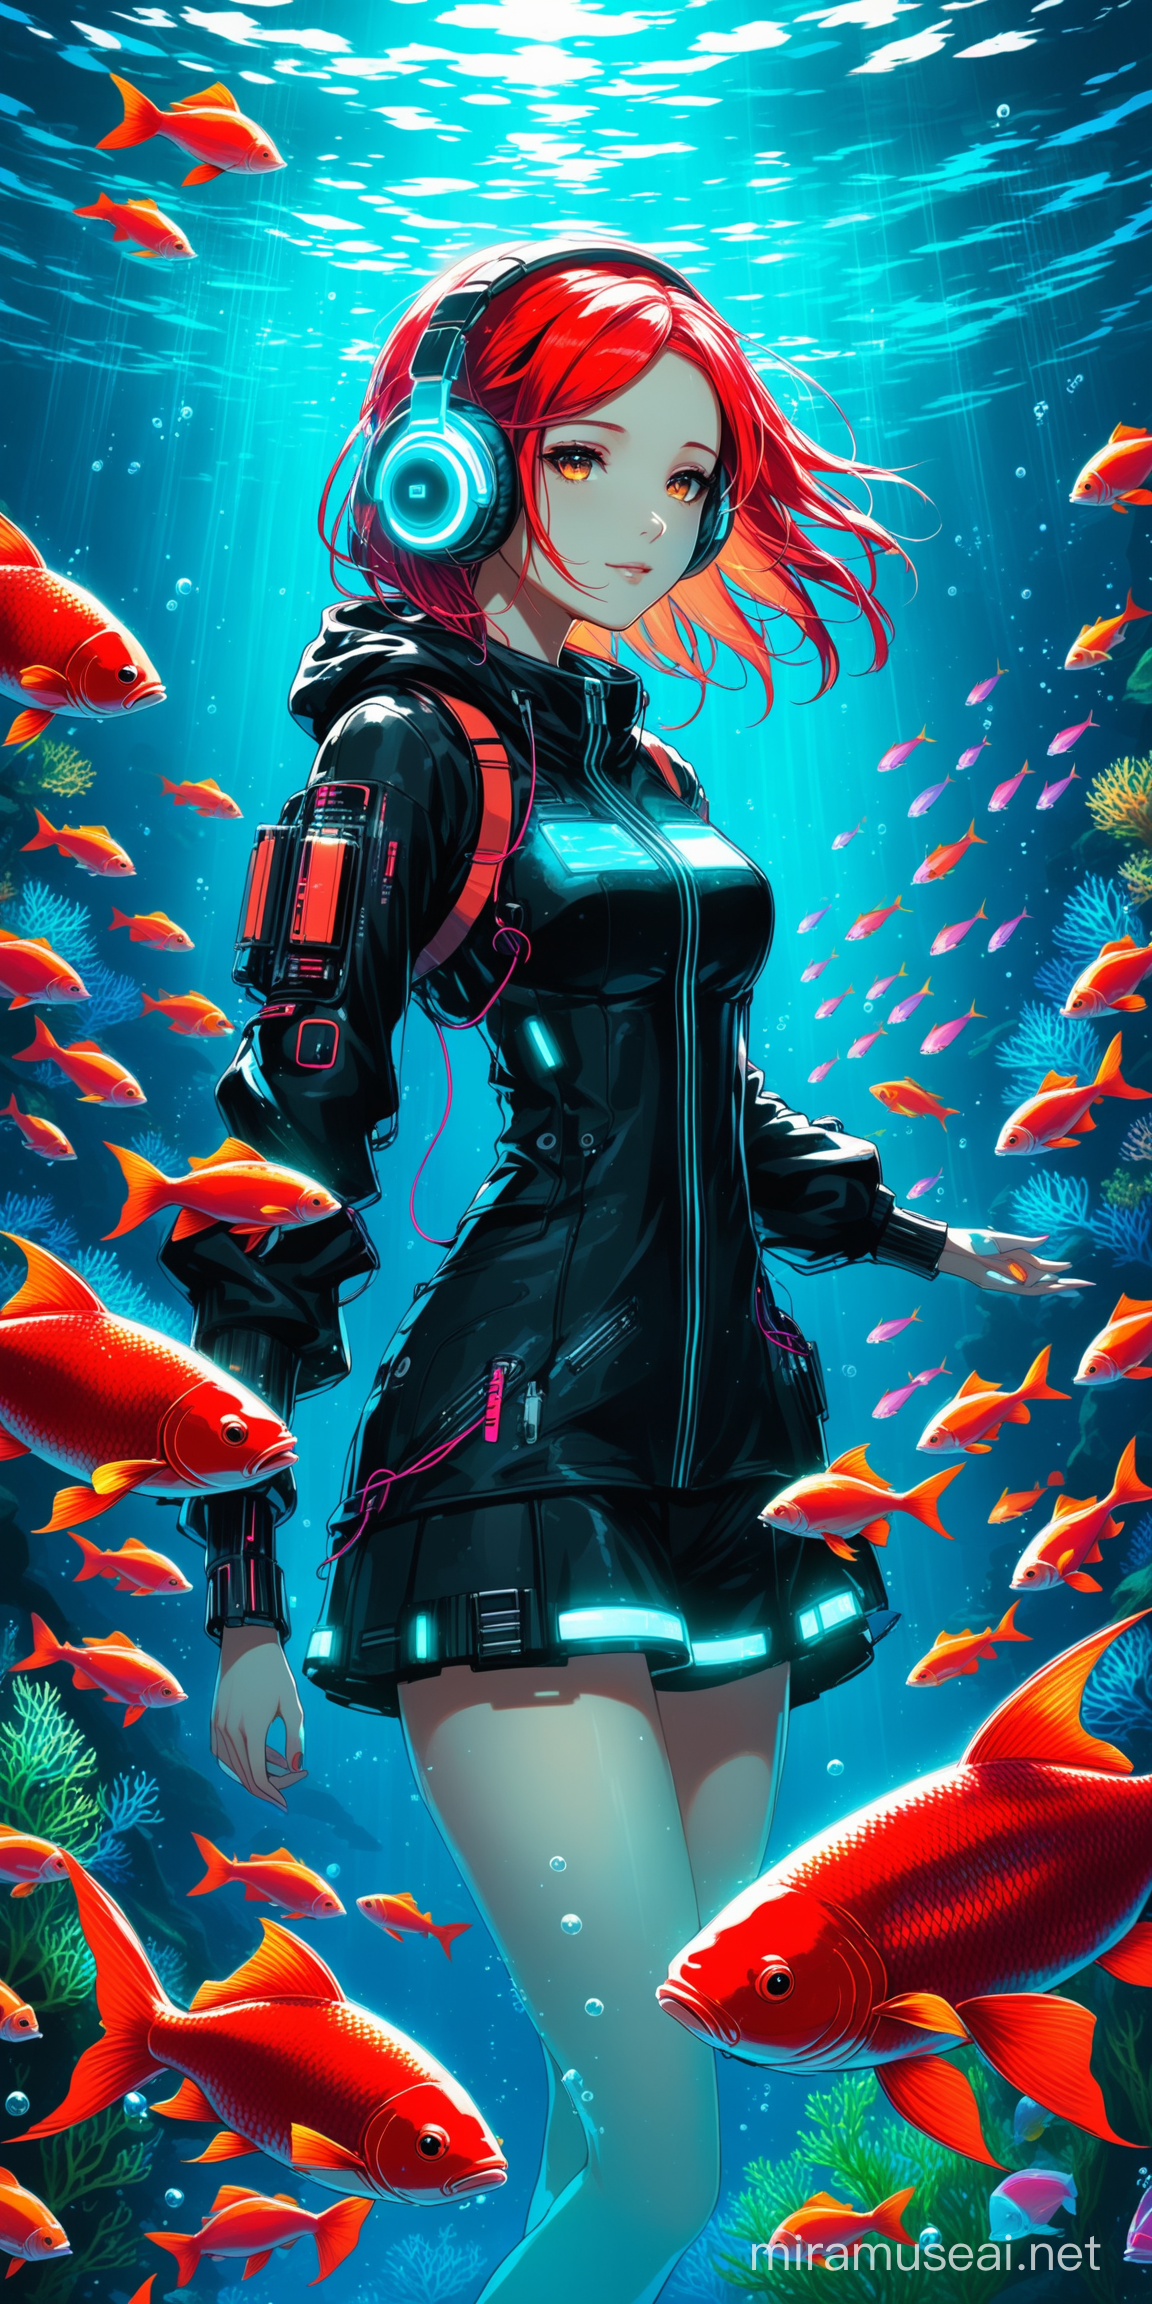 Cyber punk girl listening to music in an underwater garden with red fish swimming around with bioluminescence